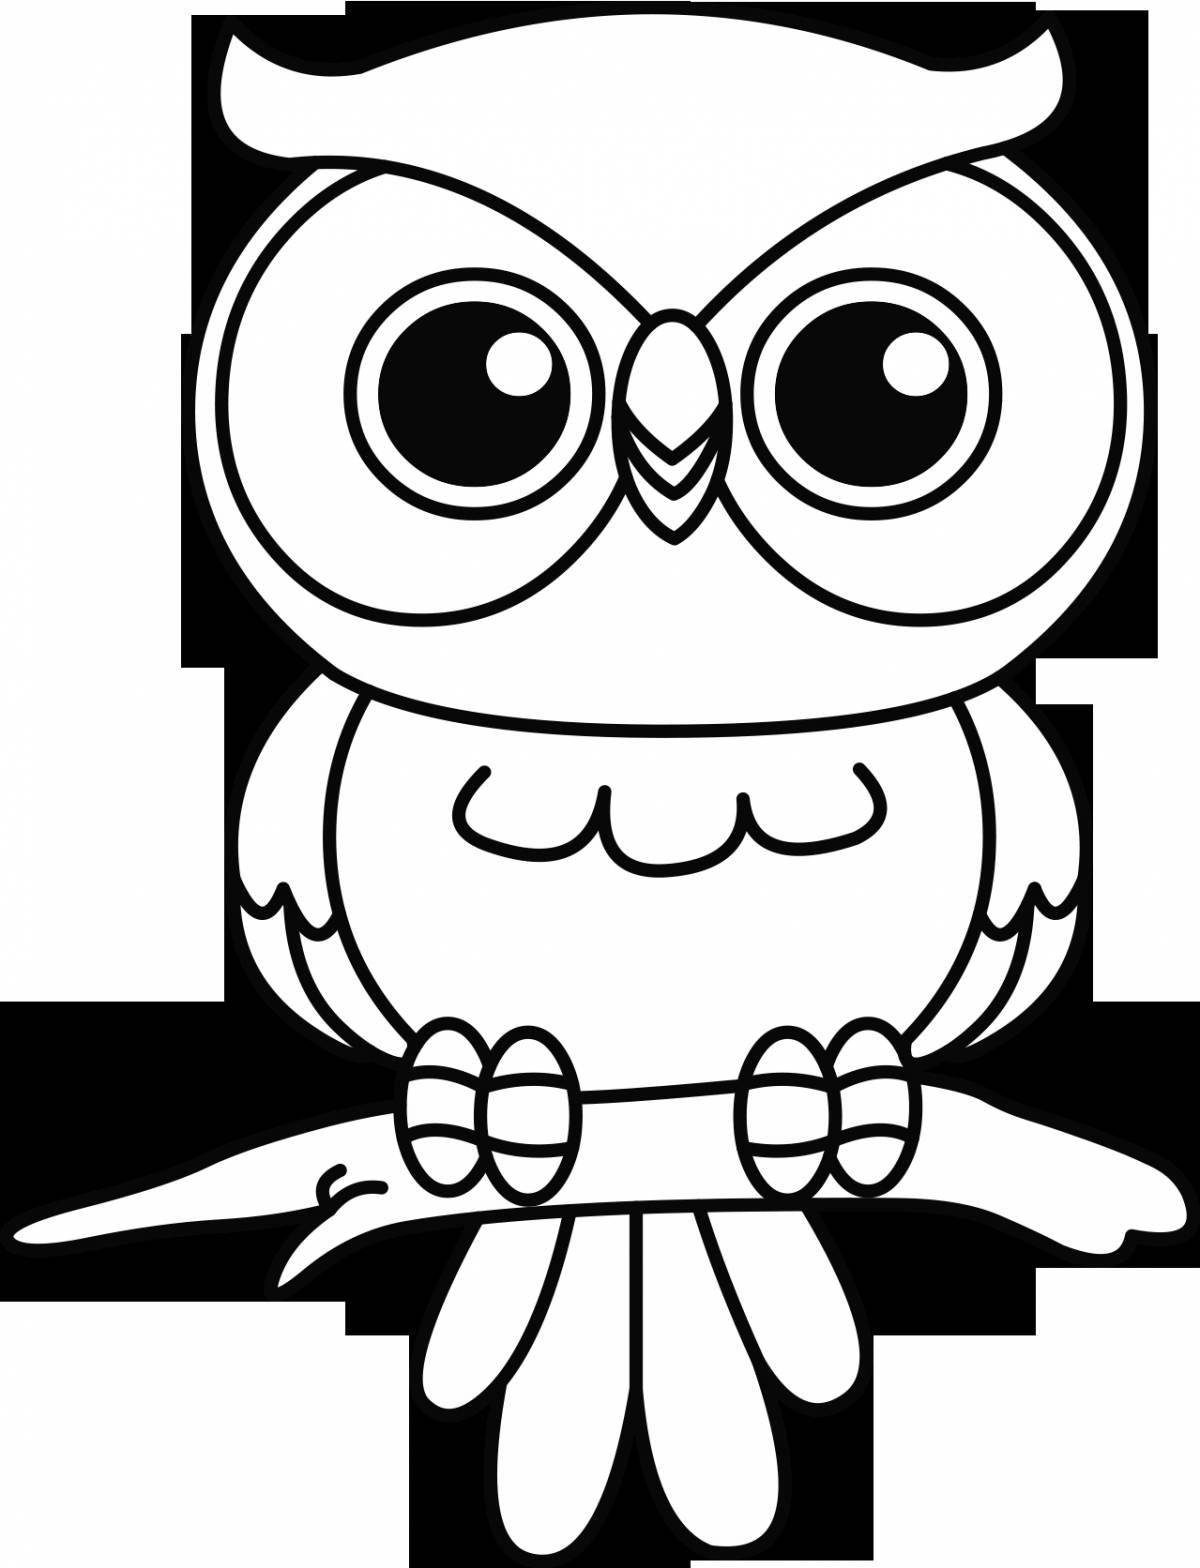 Playful hip hop owlet coloring page